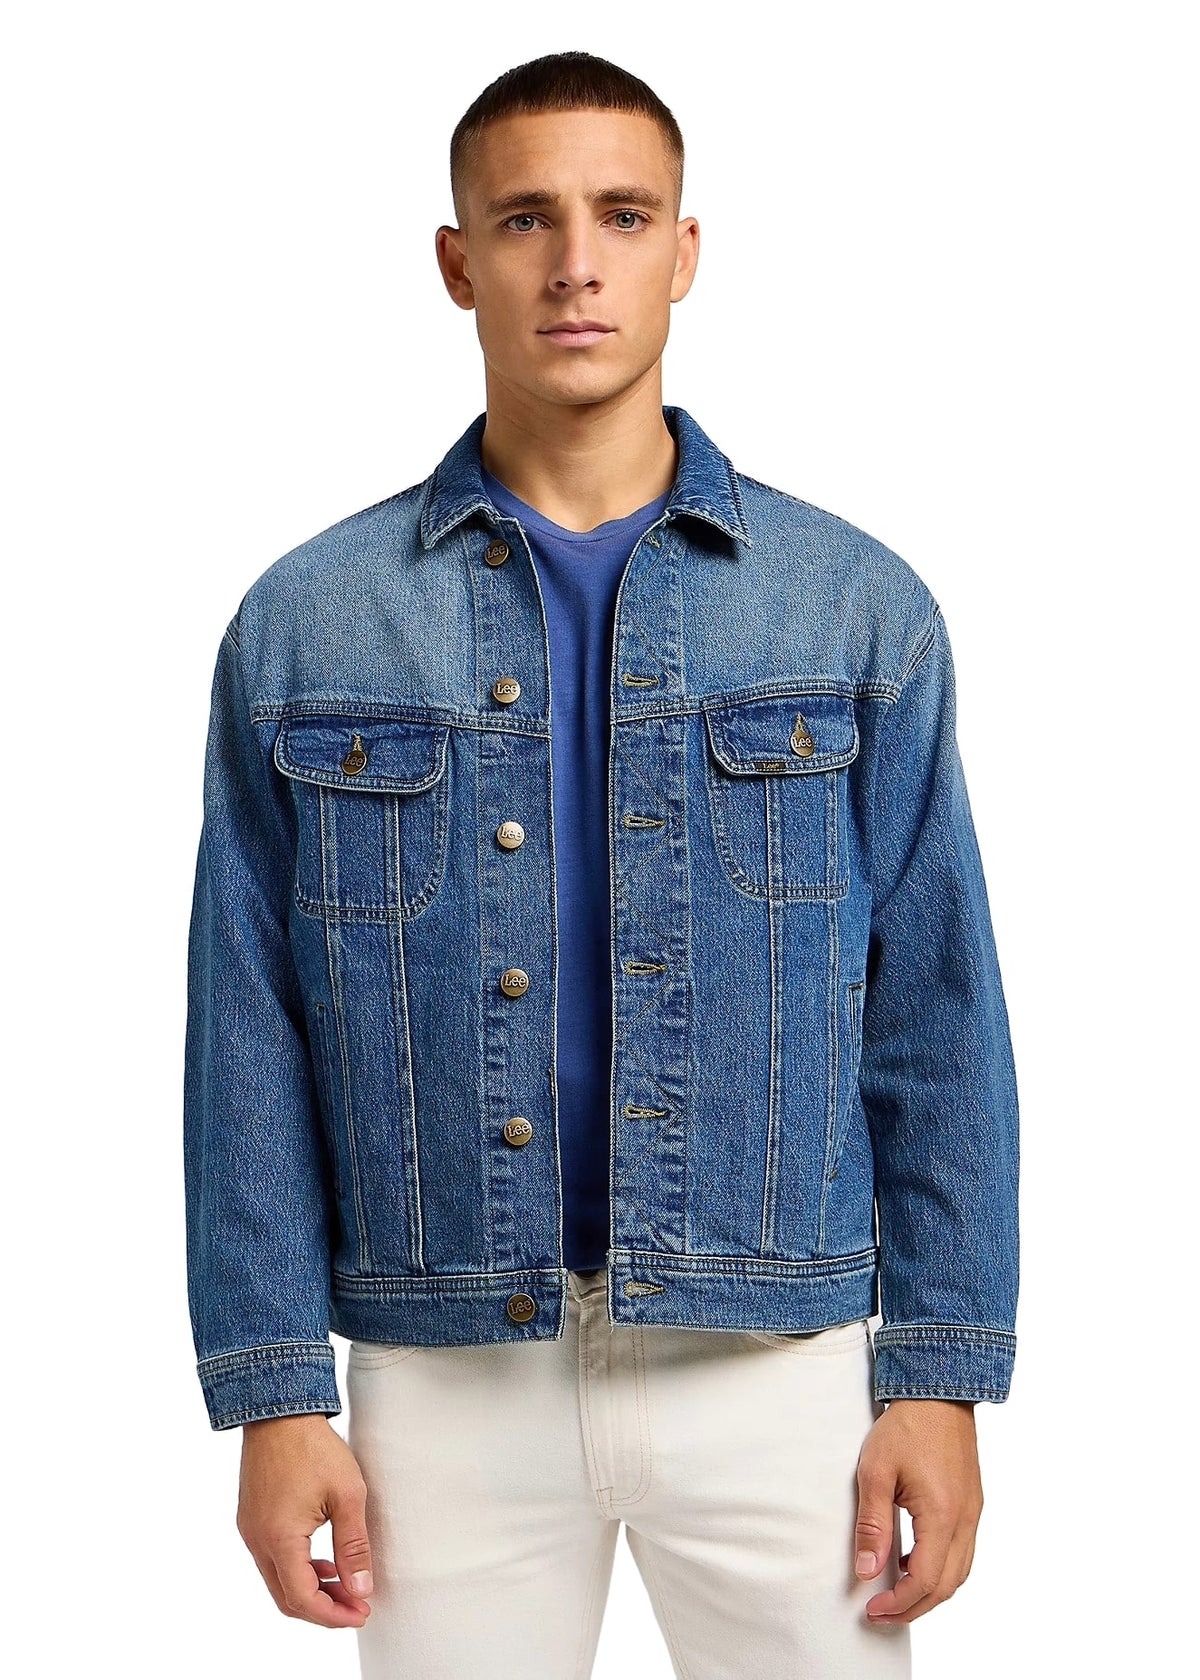 Lee Relaxed Rider Blue Jeans Jacket for Men